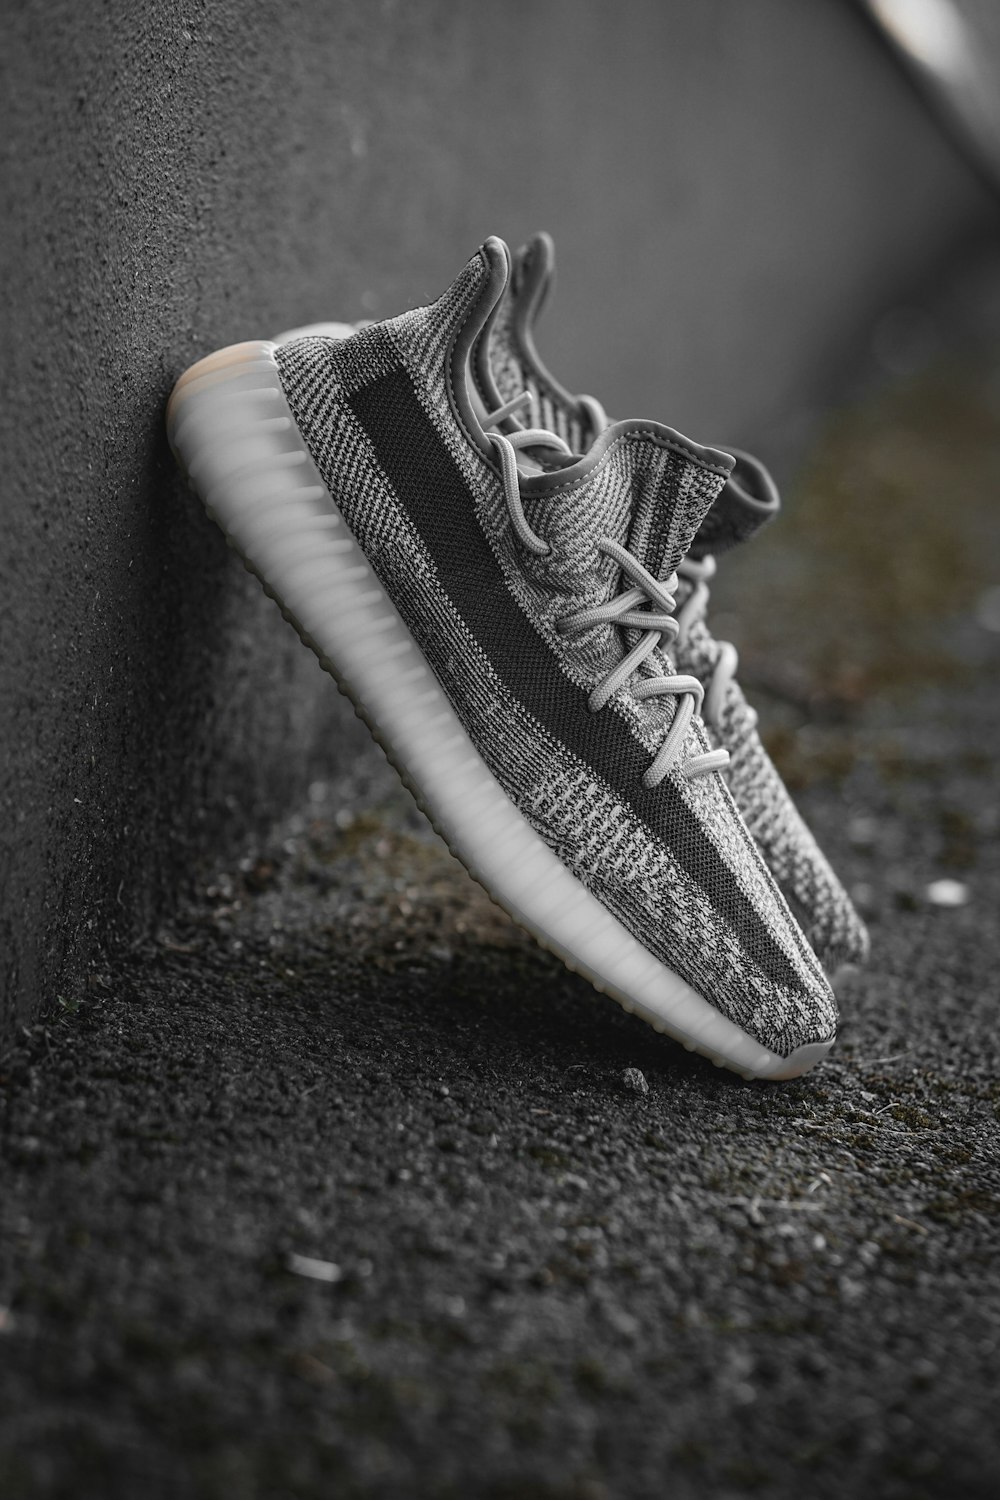 750+ Adidas Yeezy Pictures [HD] | Download Free Images on Unsplash